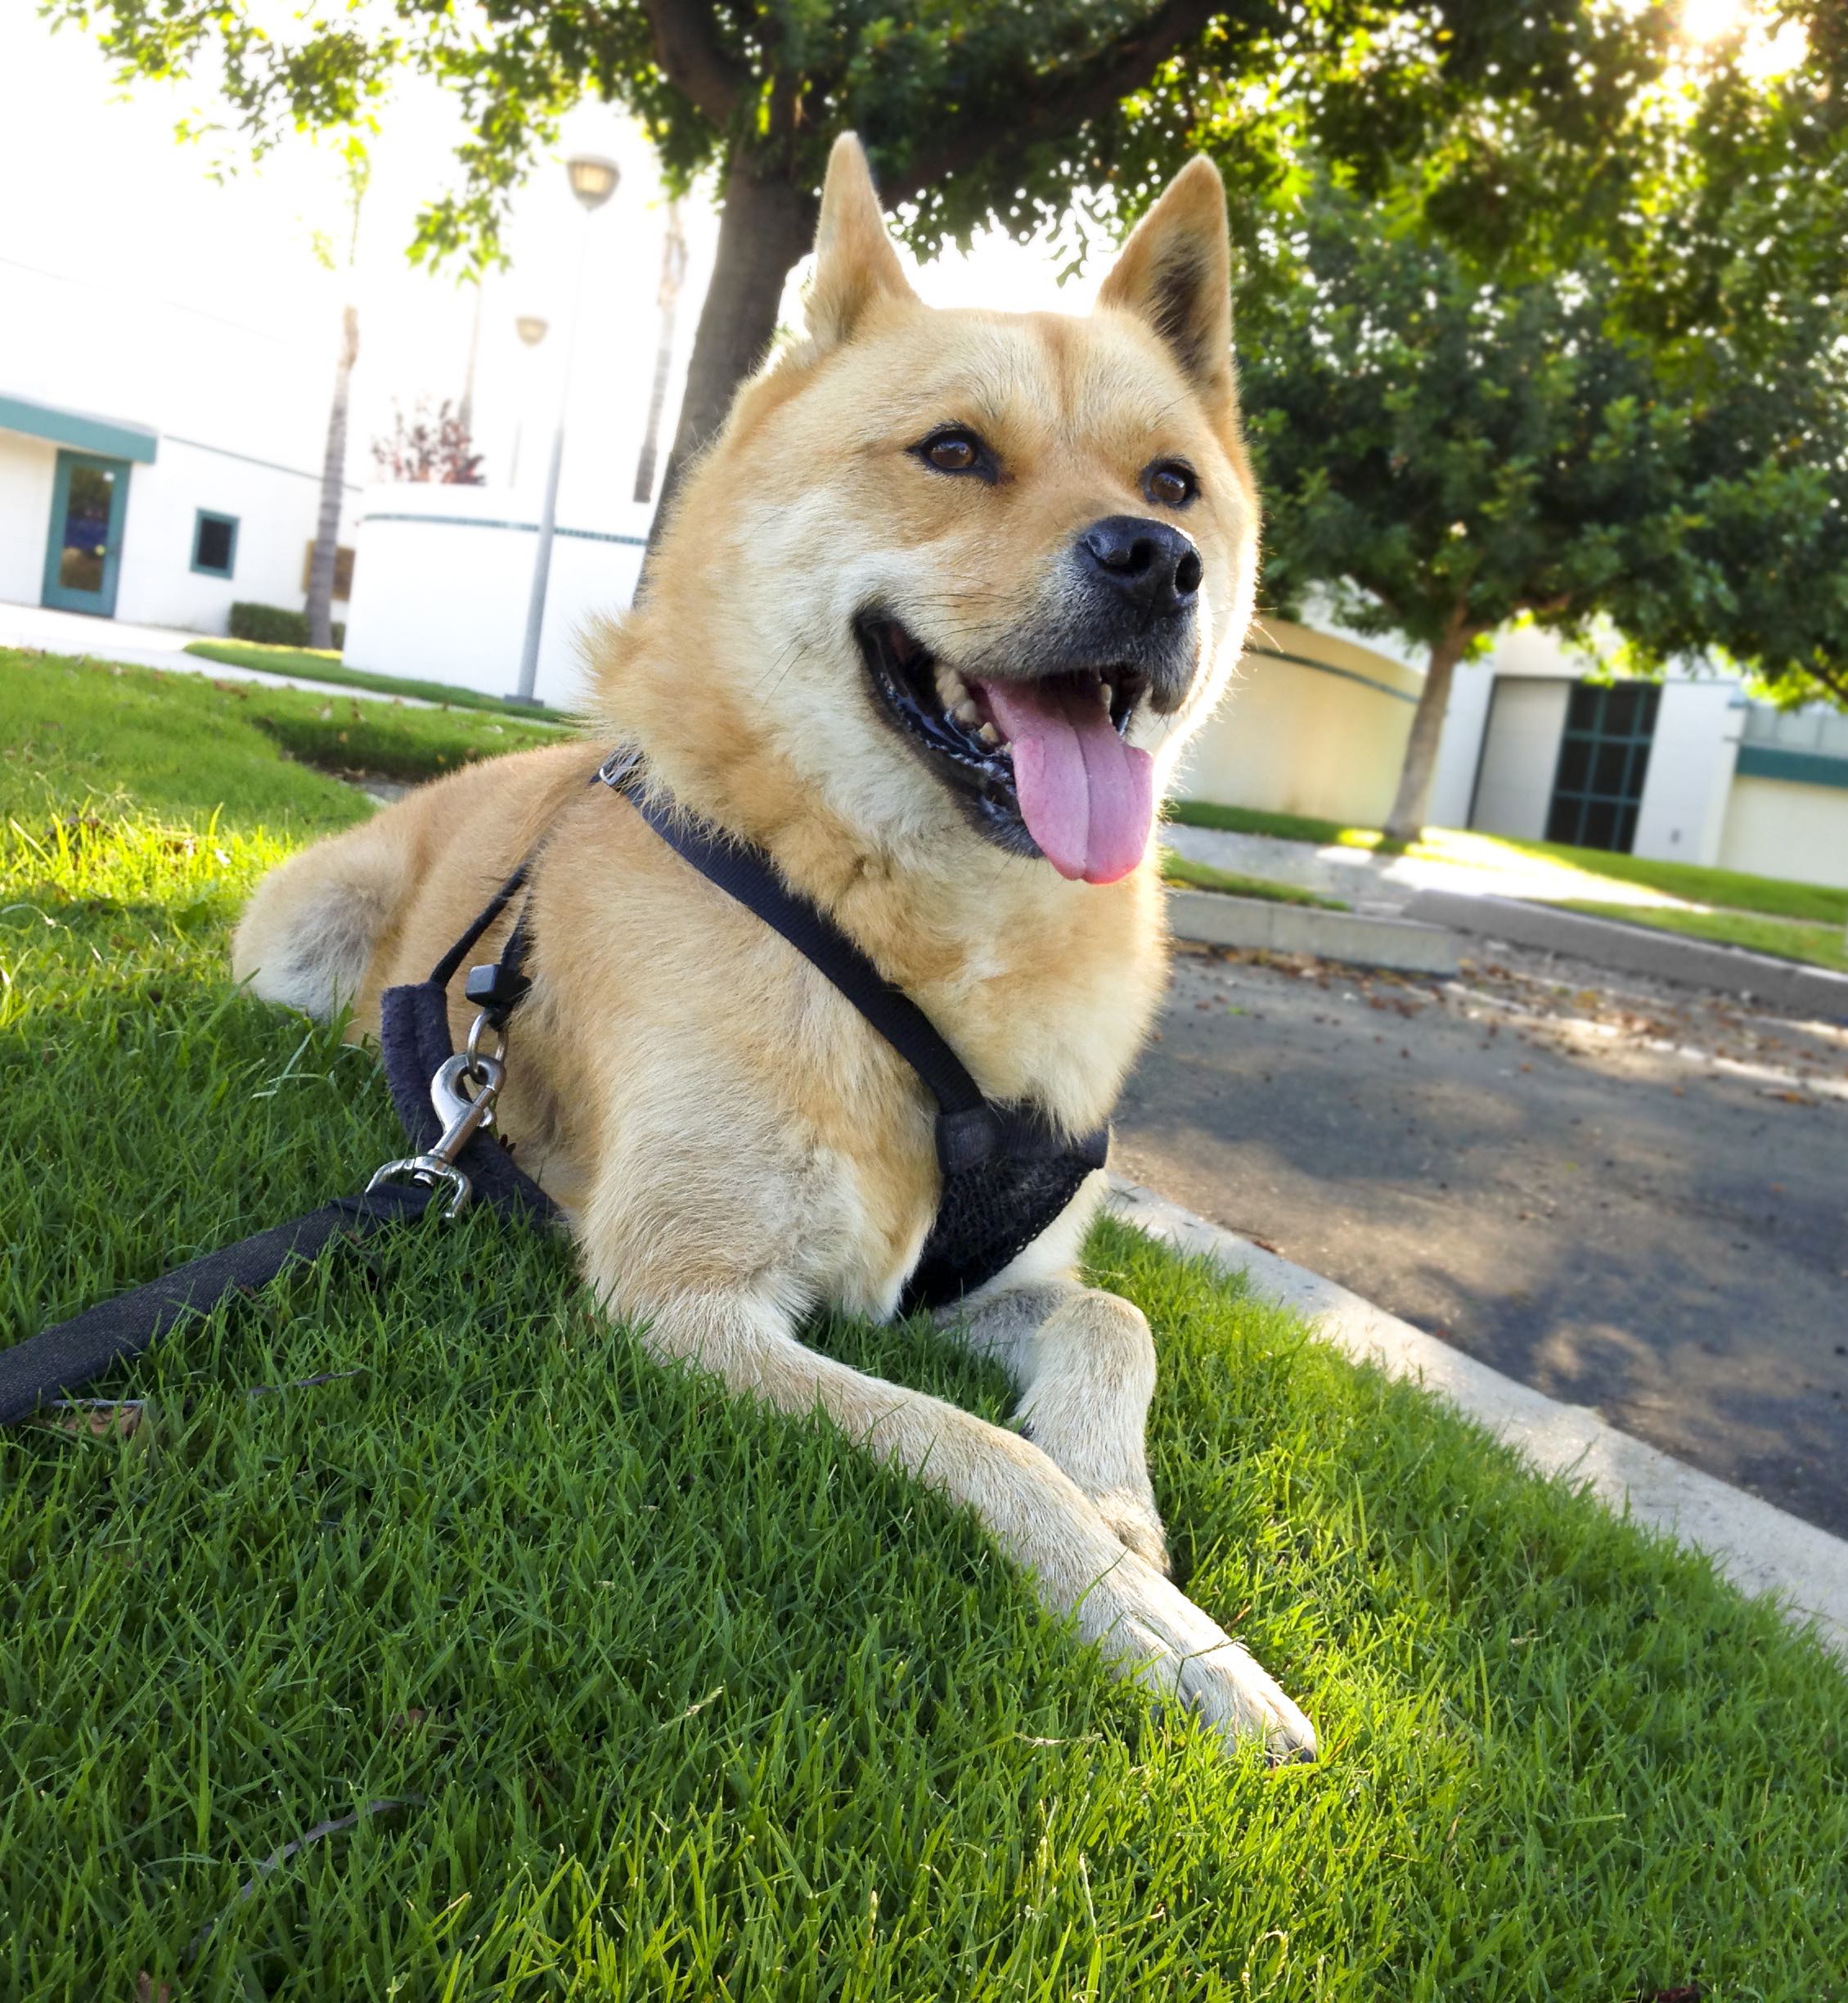 sesame jindo dog on a harness lying in grass